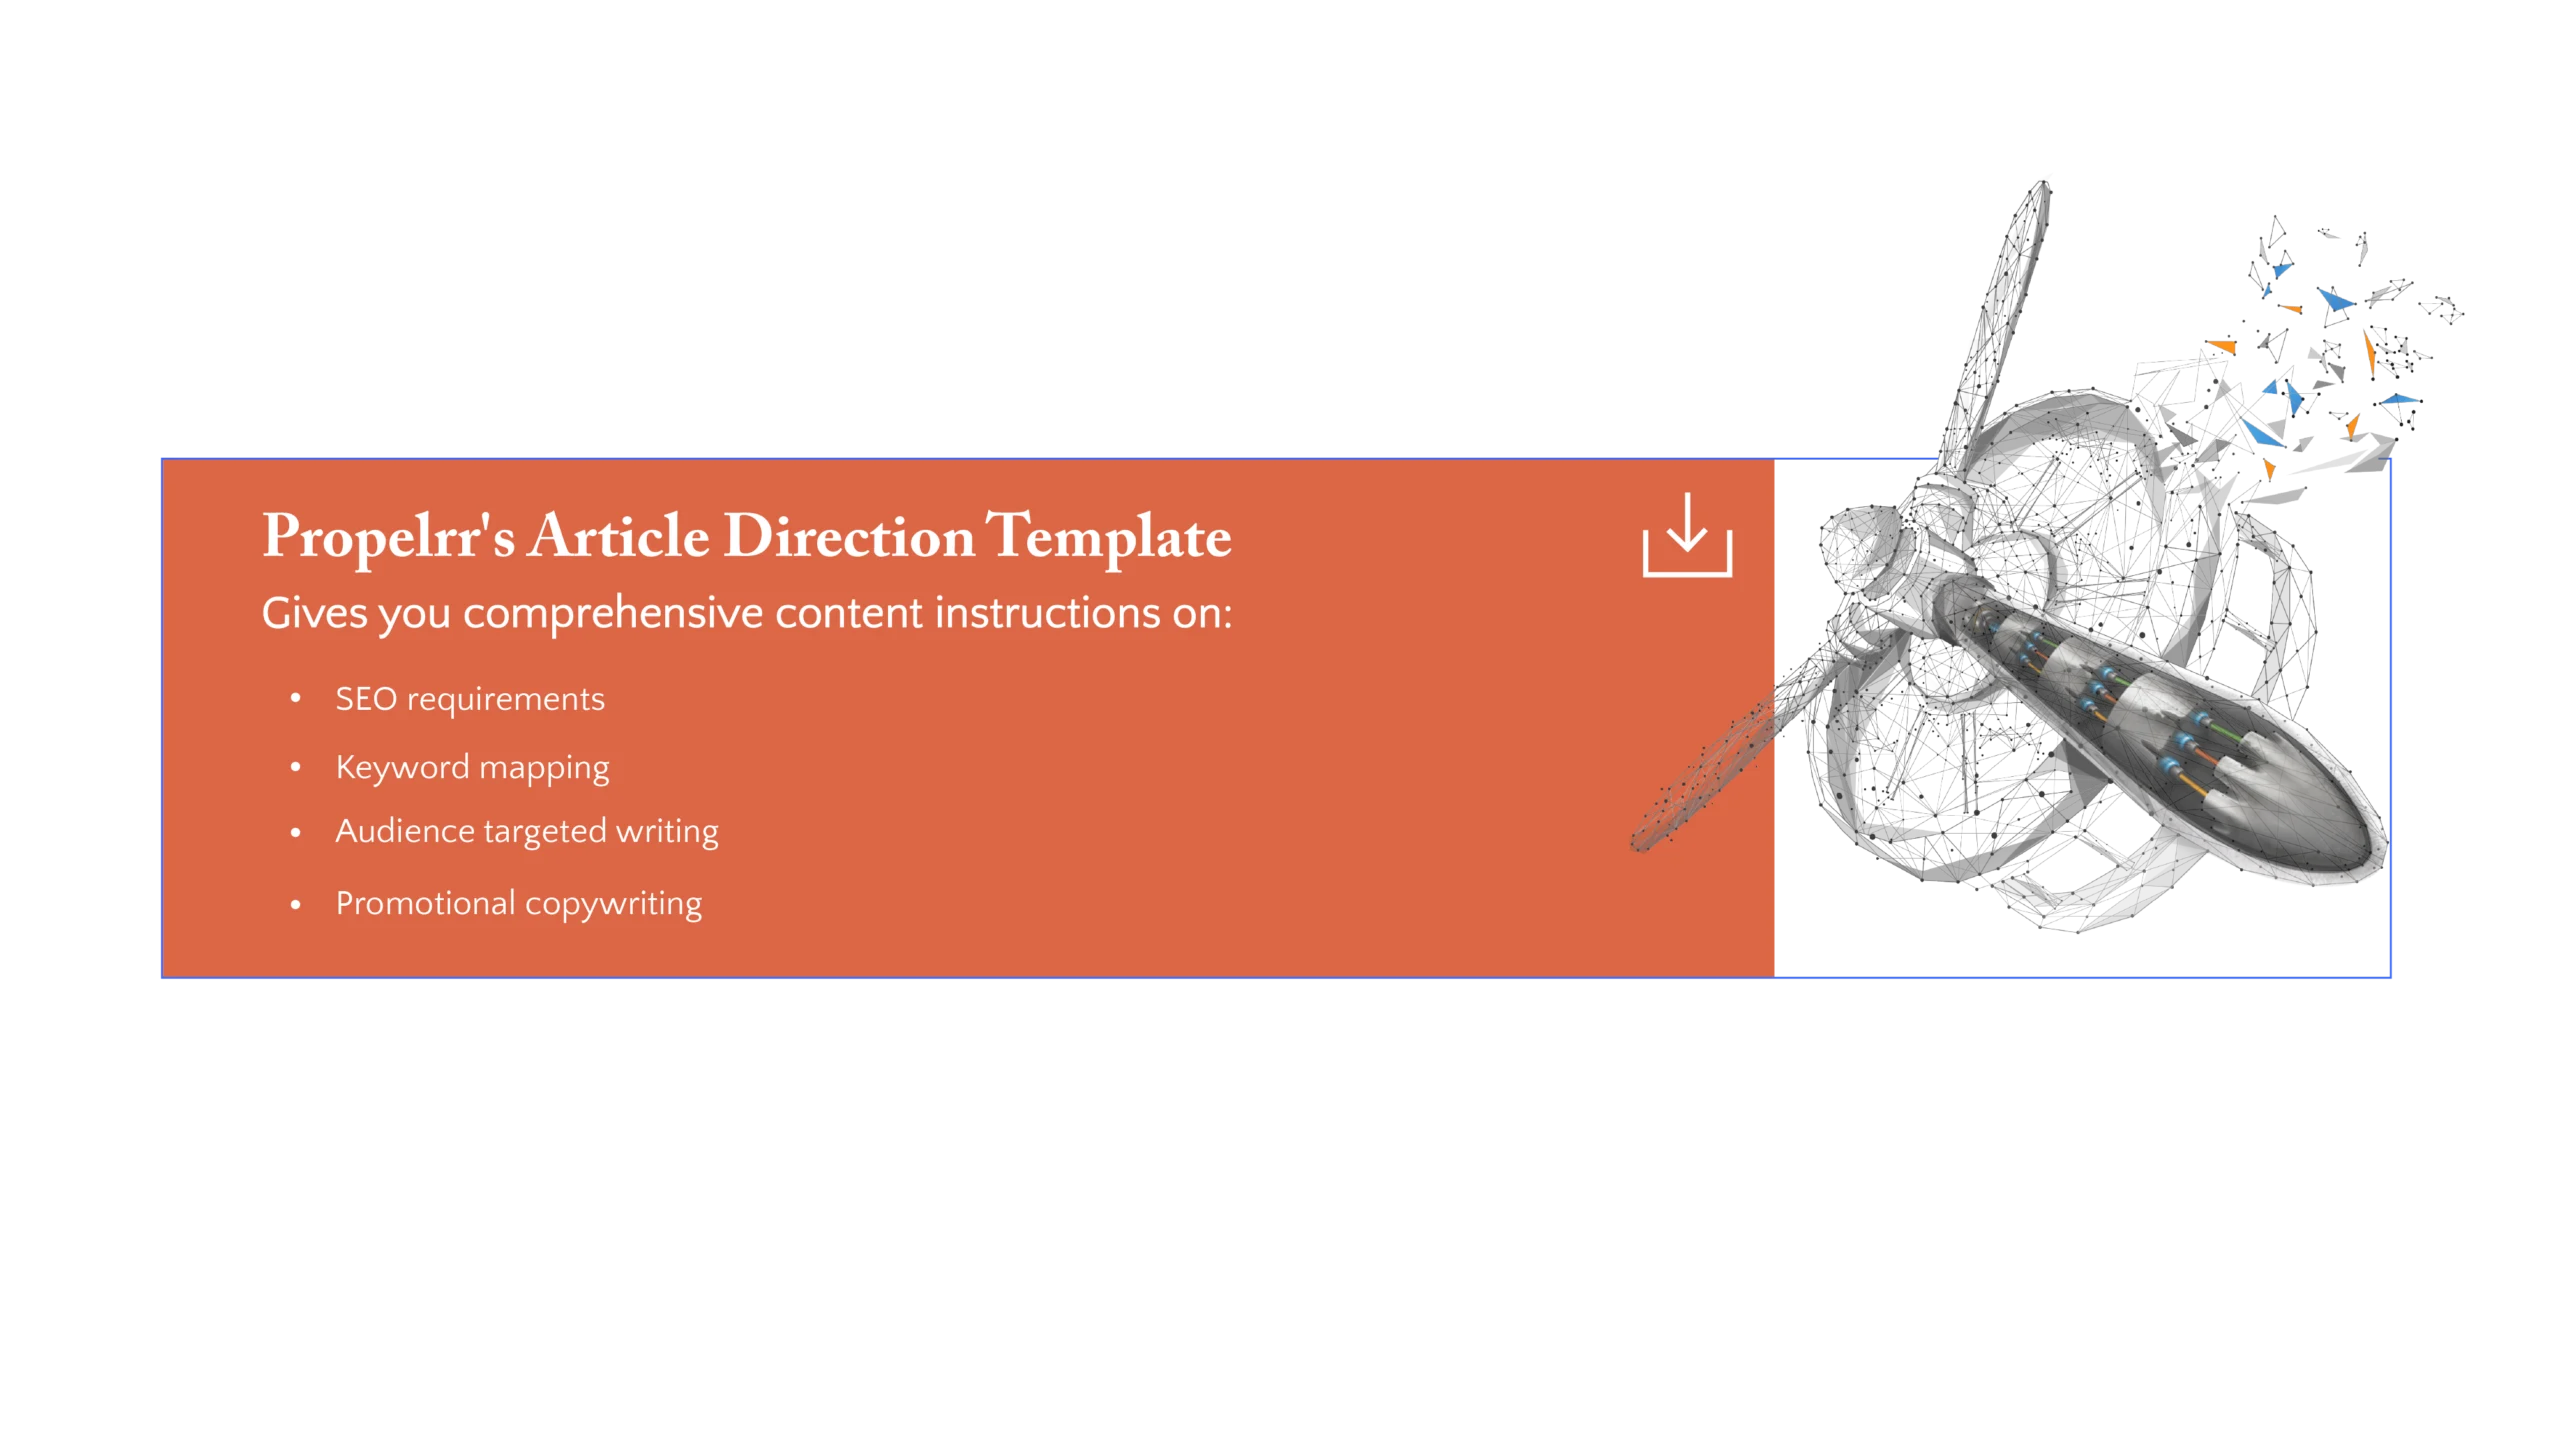 Propelrr's Article Direction Template